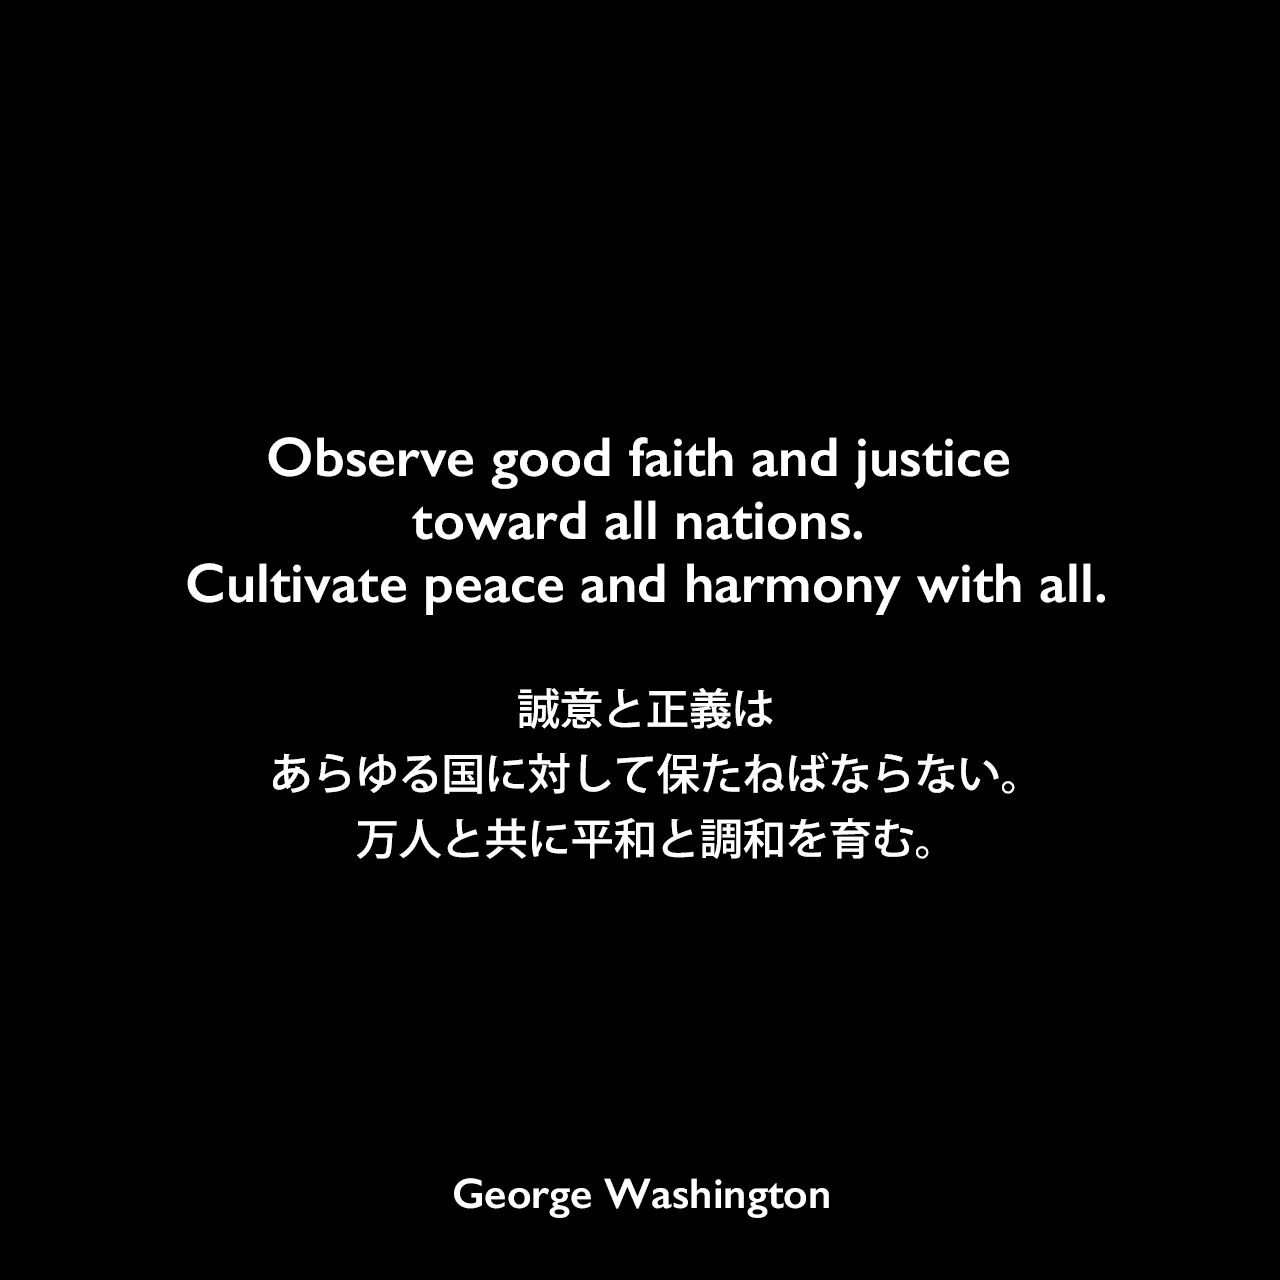 Observe good faith and justice toward all nations. Cultivate peace and harmony with all.誠意と正義はあらゆる国に対して保たねばならない。万人と共に平和と調和を育む。- 1796年の初代大統領退任挨拶よりGeorge Washington